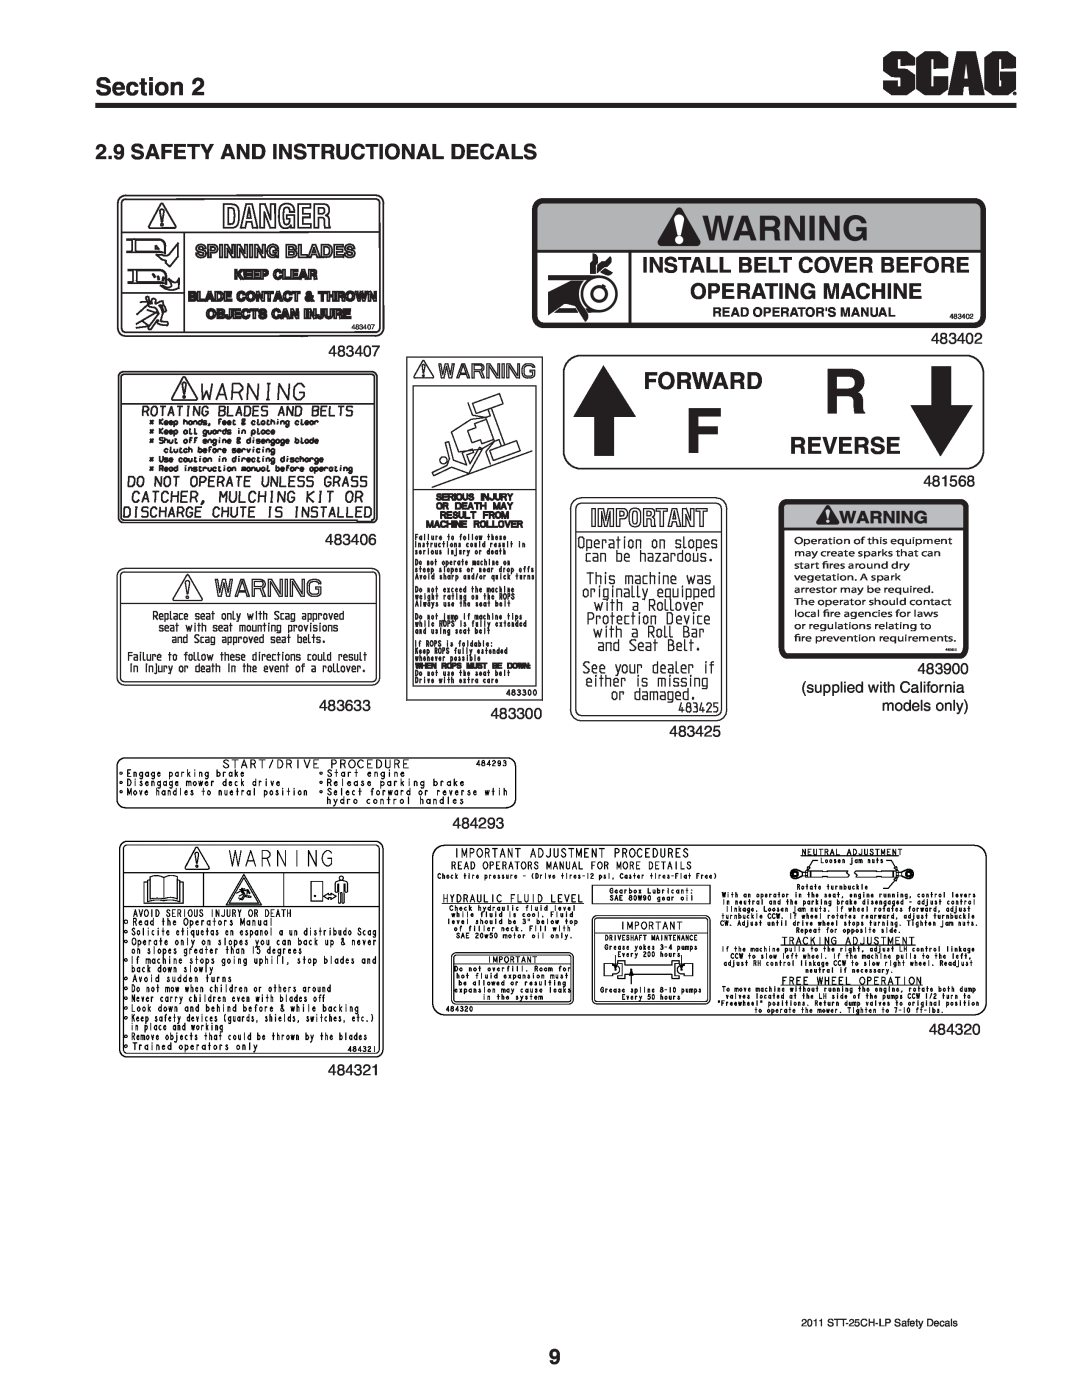 Scag Power Equipment STT61V-25CH-LP Section, Reverse, Forward, Safety And Instructional Decals, 483407, 481568, 483406 